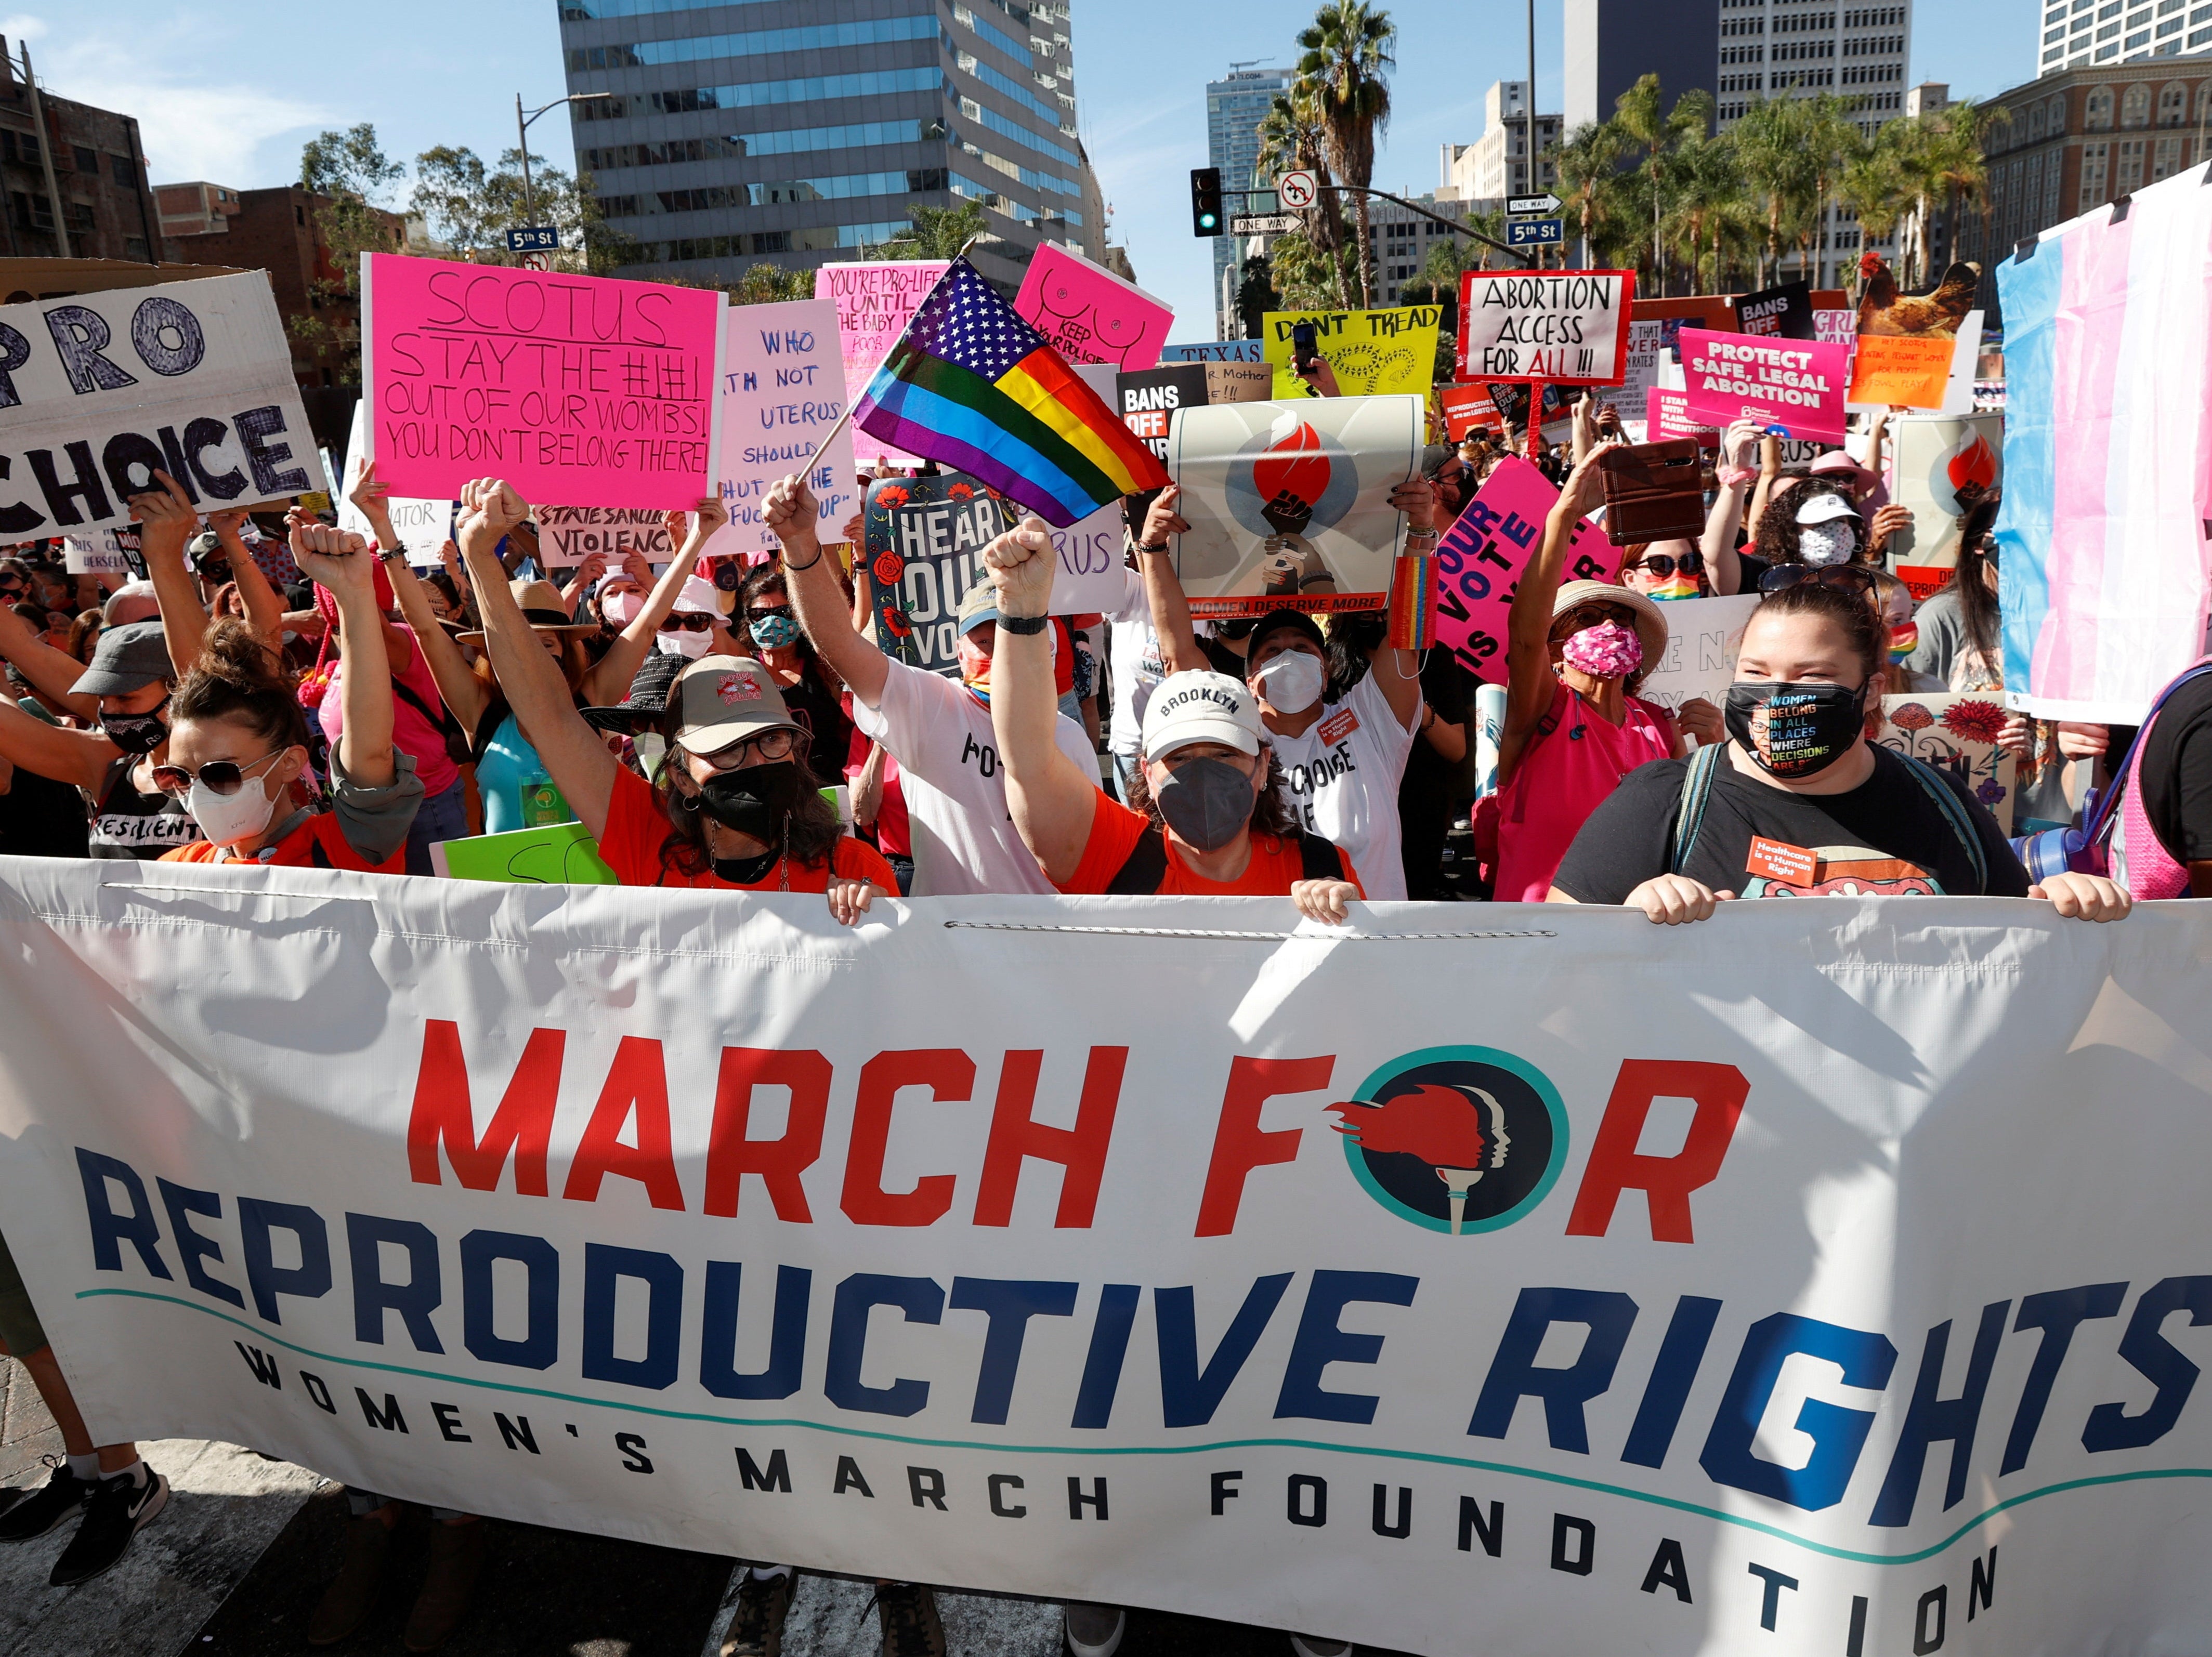 Supporters of reproductive choice take part in a Women’s march in Los Angeles in October